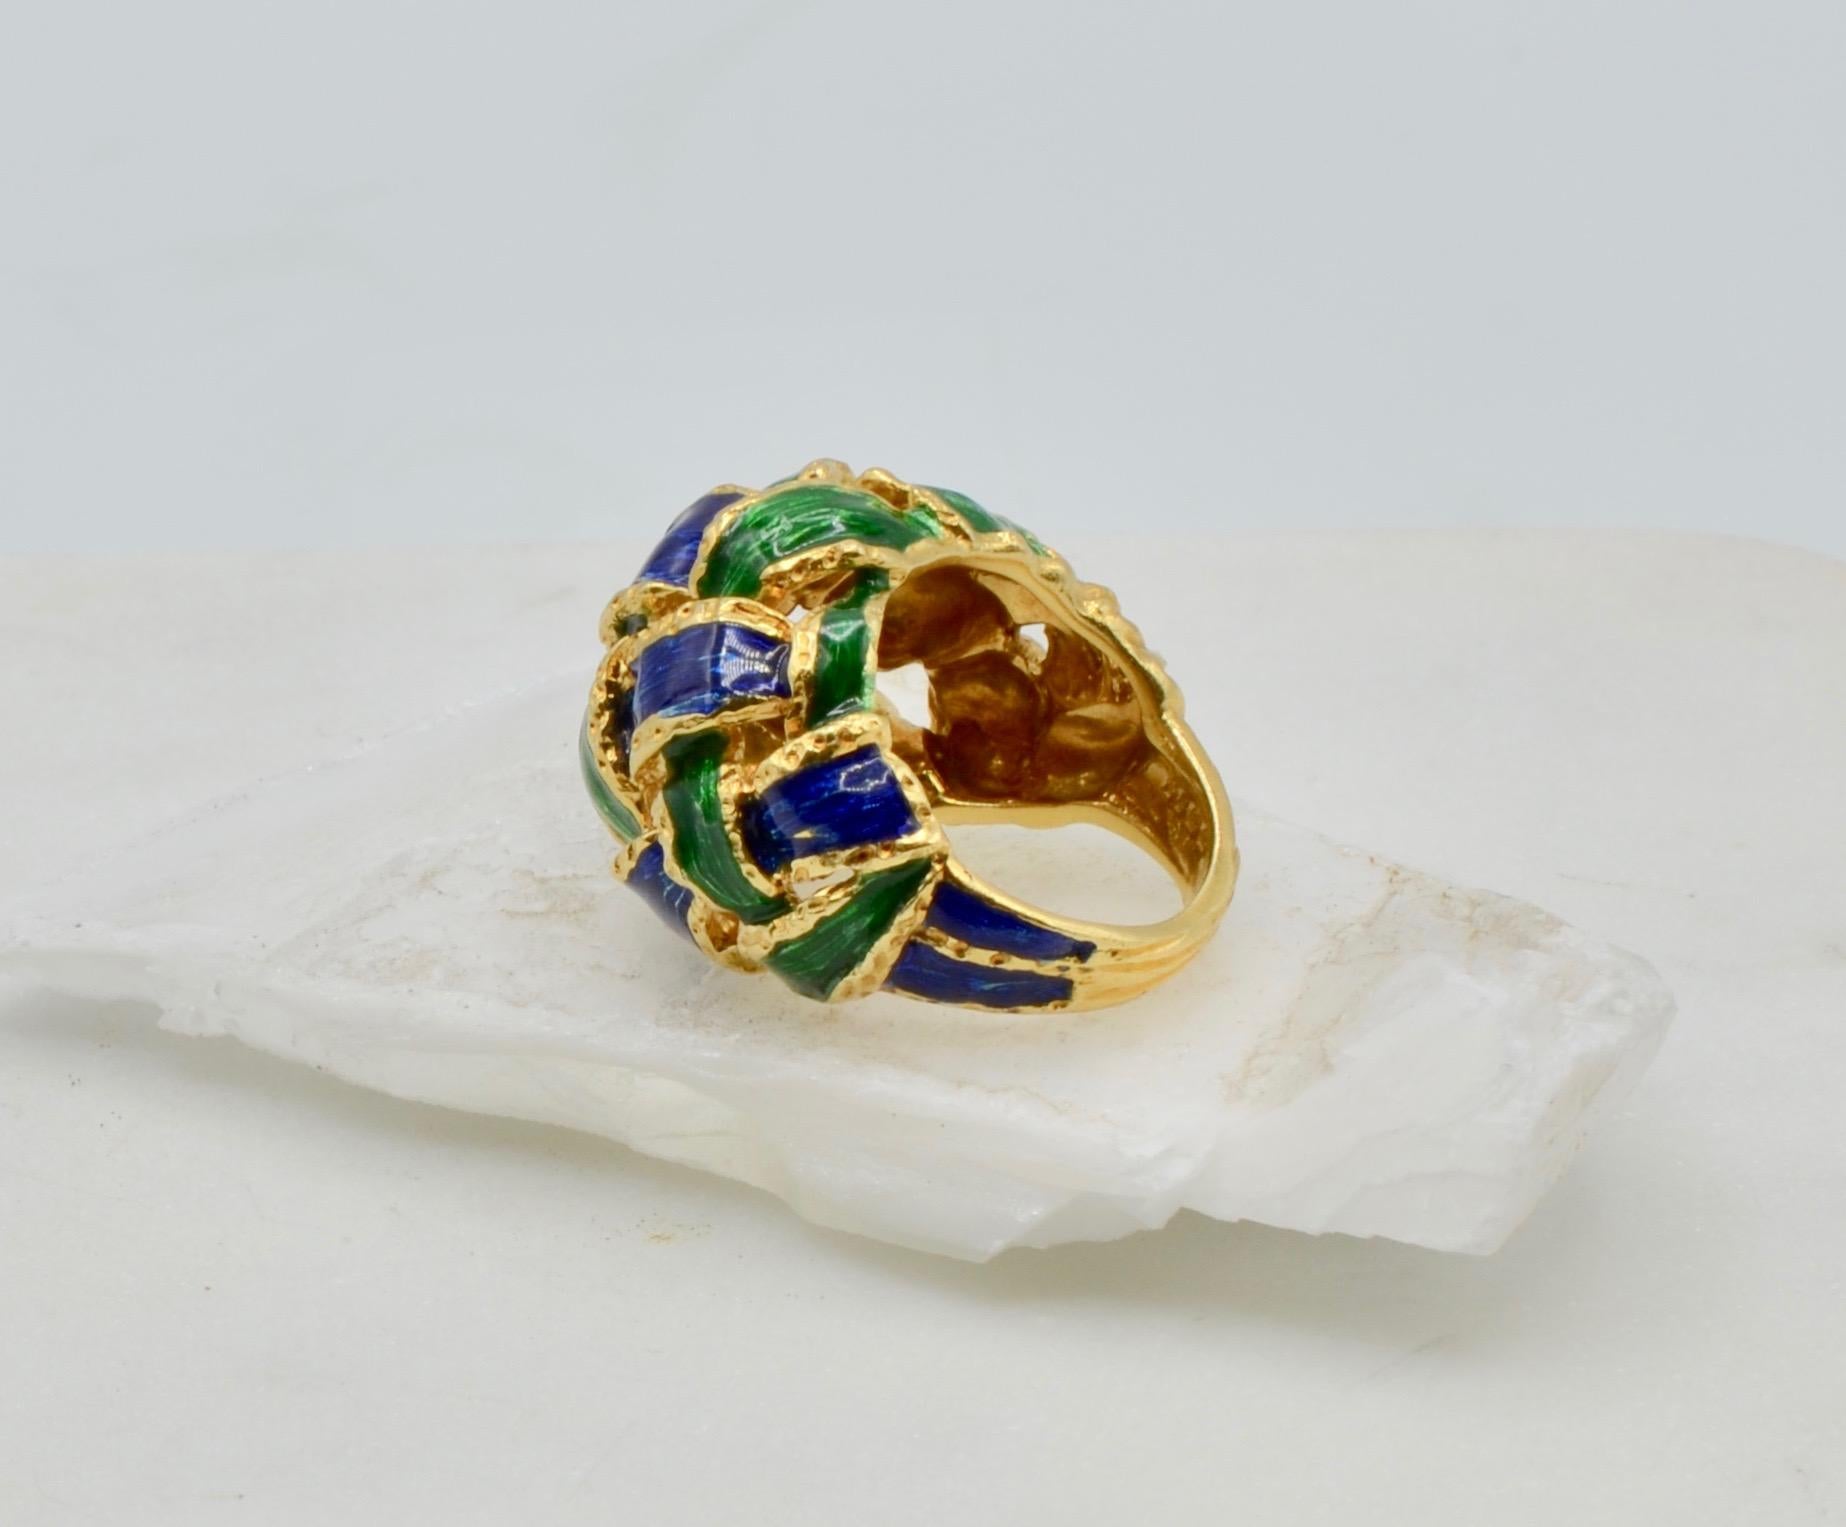 This stunner is a statement in emerald and sapphire enamel in 18 karat gold. The ring is very reminiscent of Diana Vreeland or Iris Apfel..... This ring is a size 5 1/2.